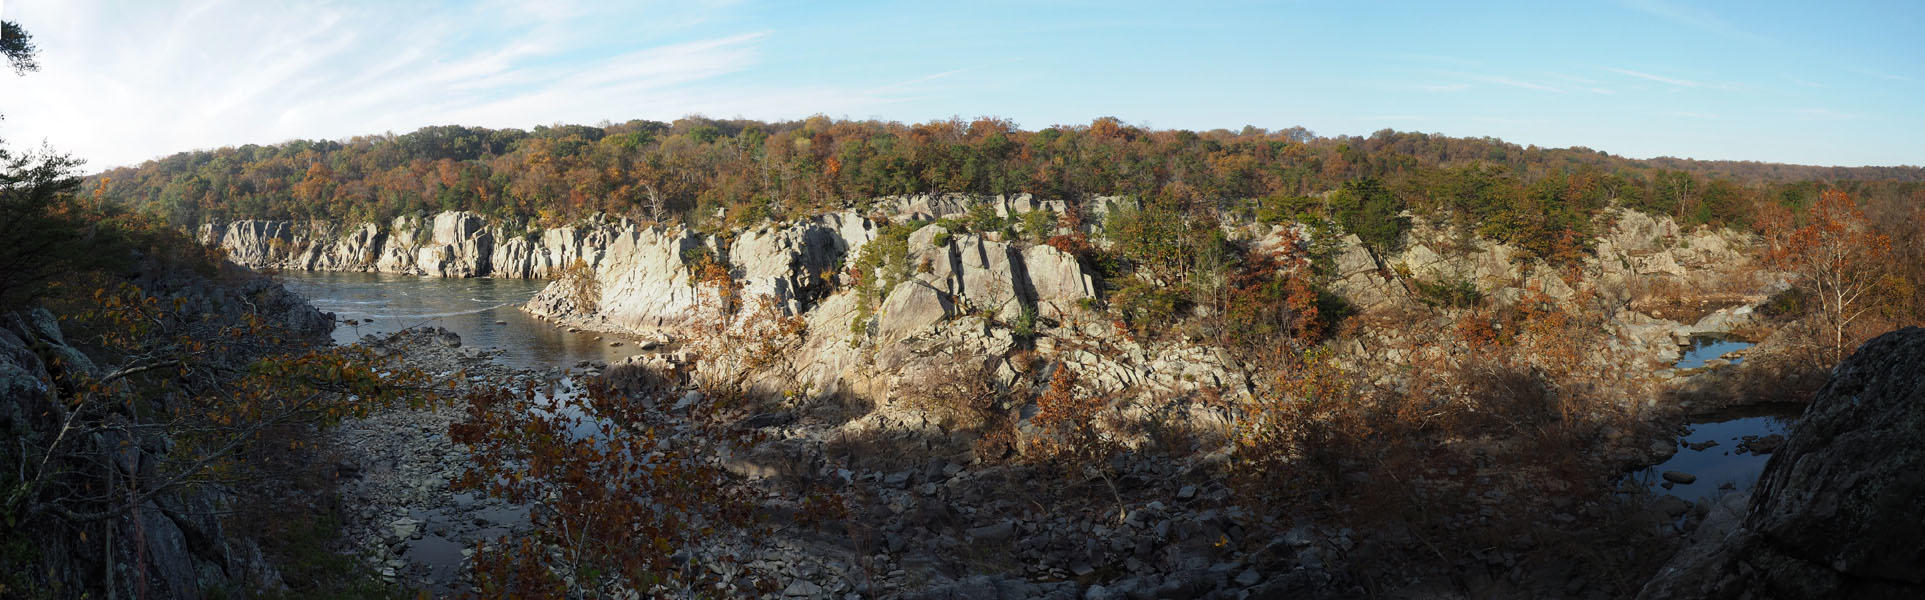 Panorama - Mather Gorge early in the morning